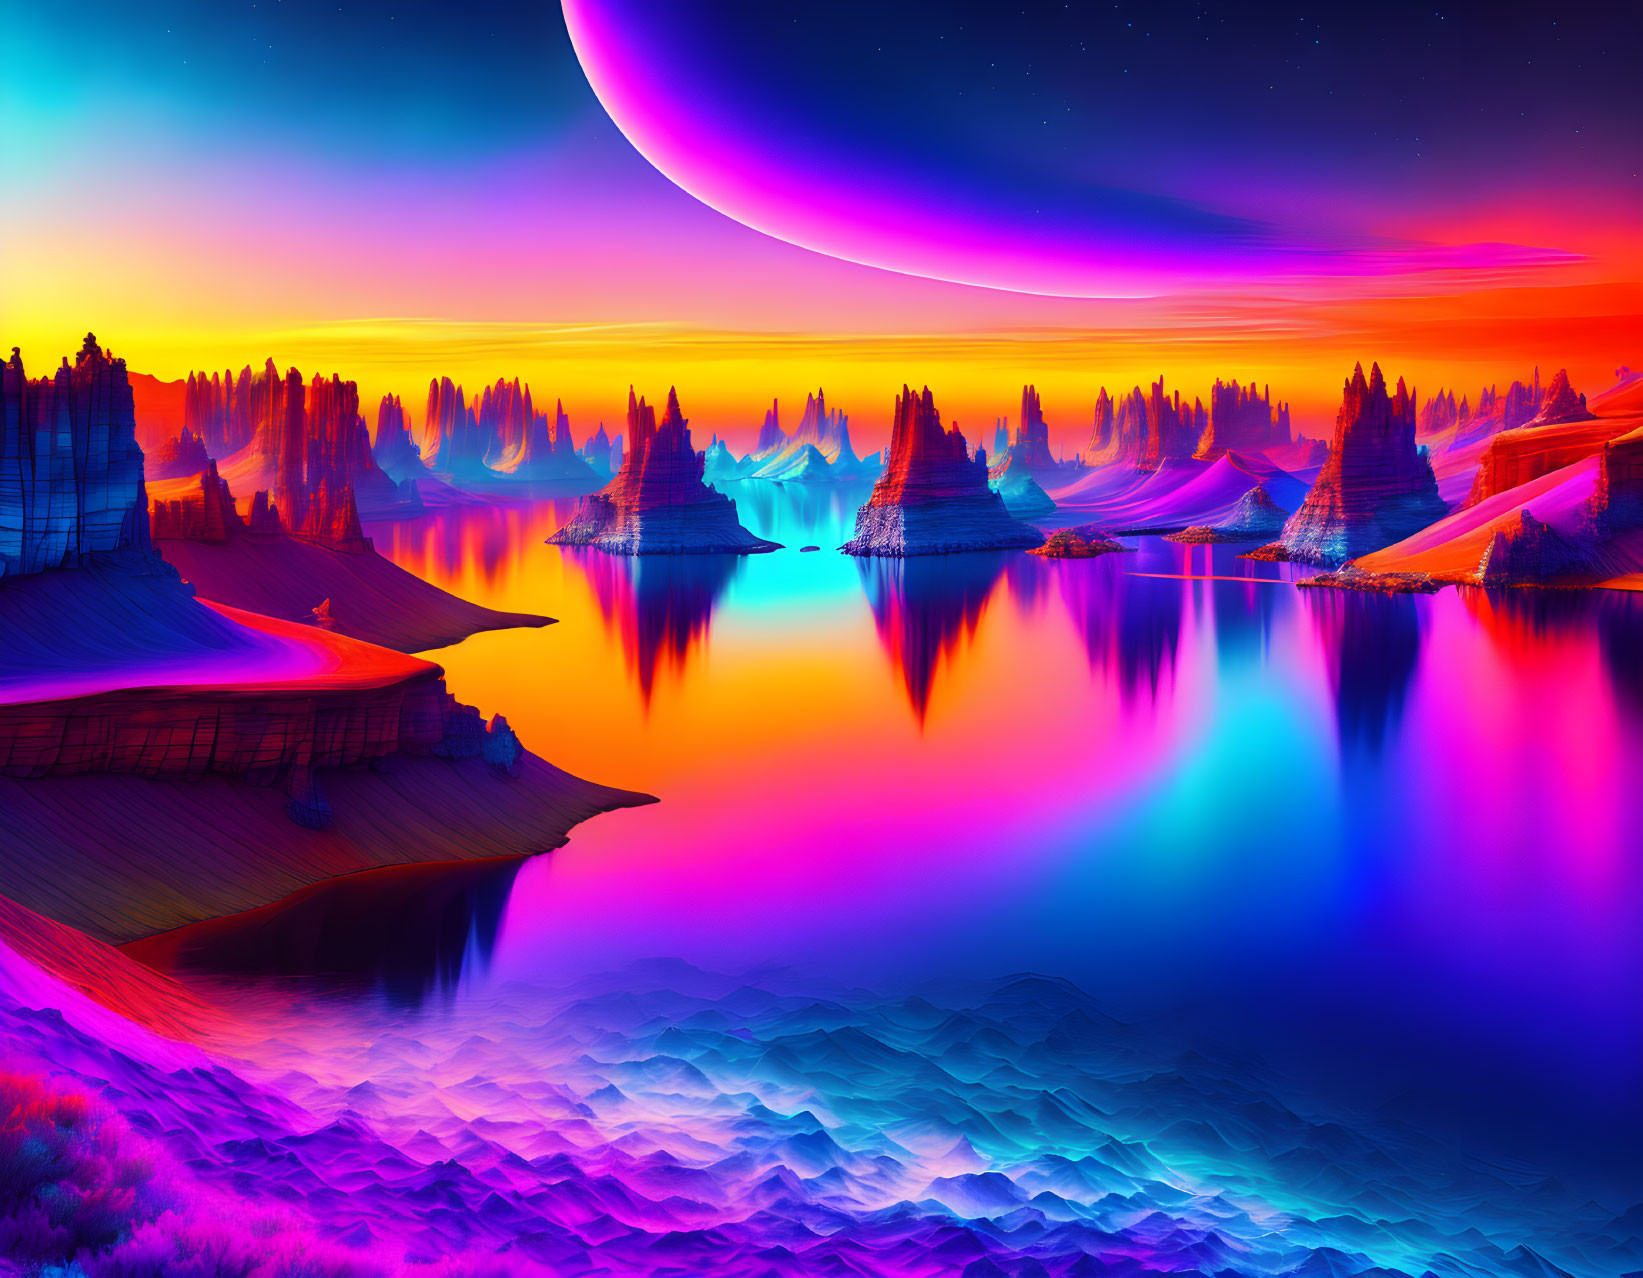 Neon-lit landscape with colorful trees and crescent planet